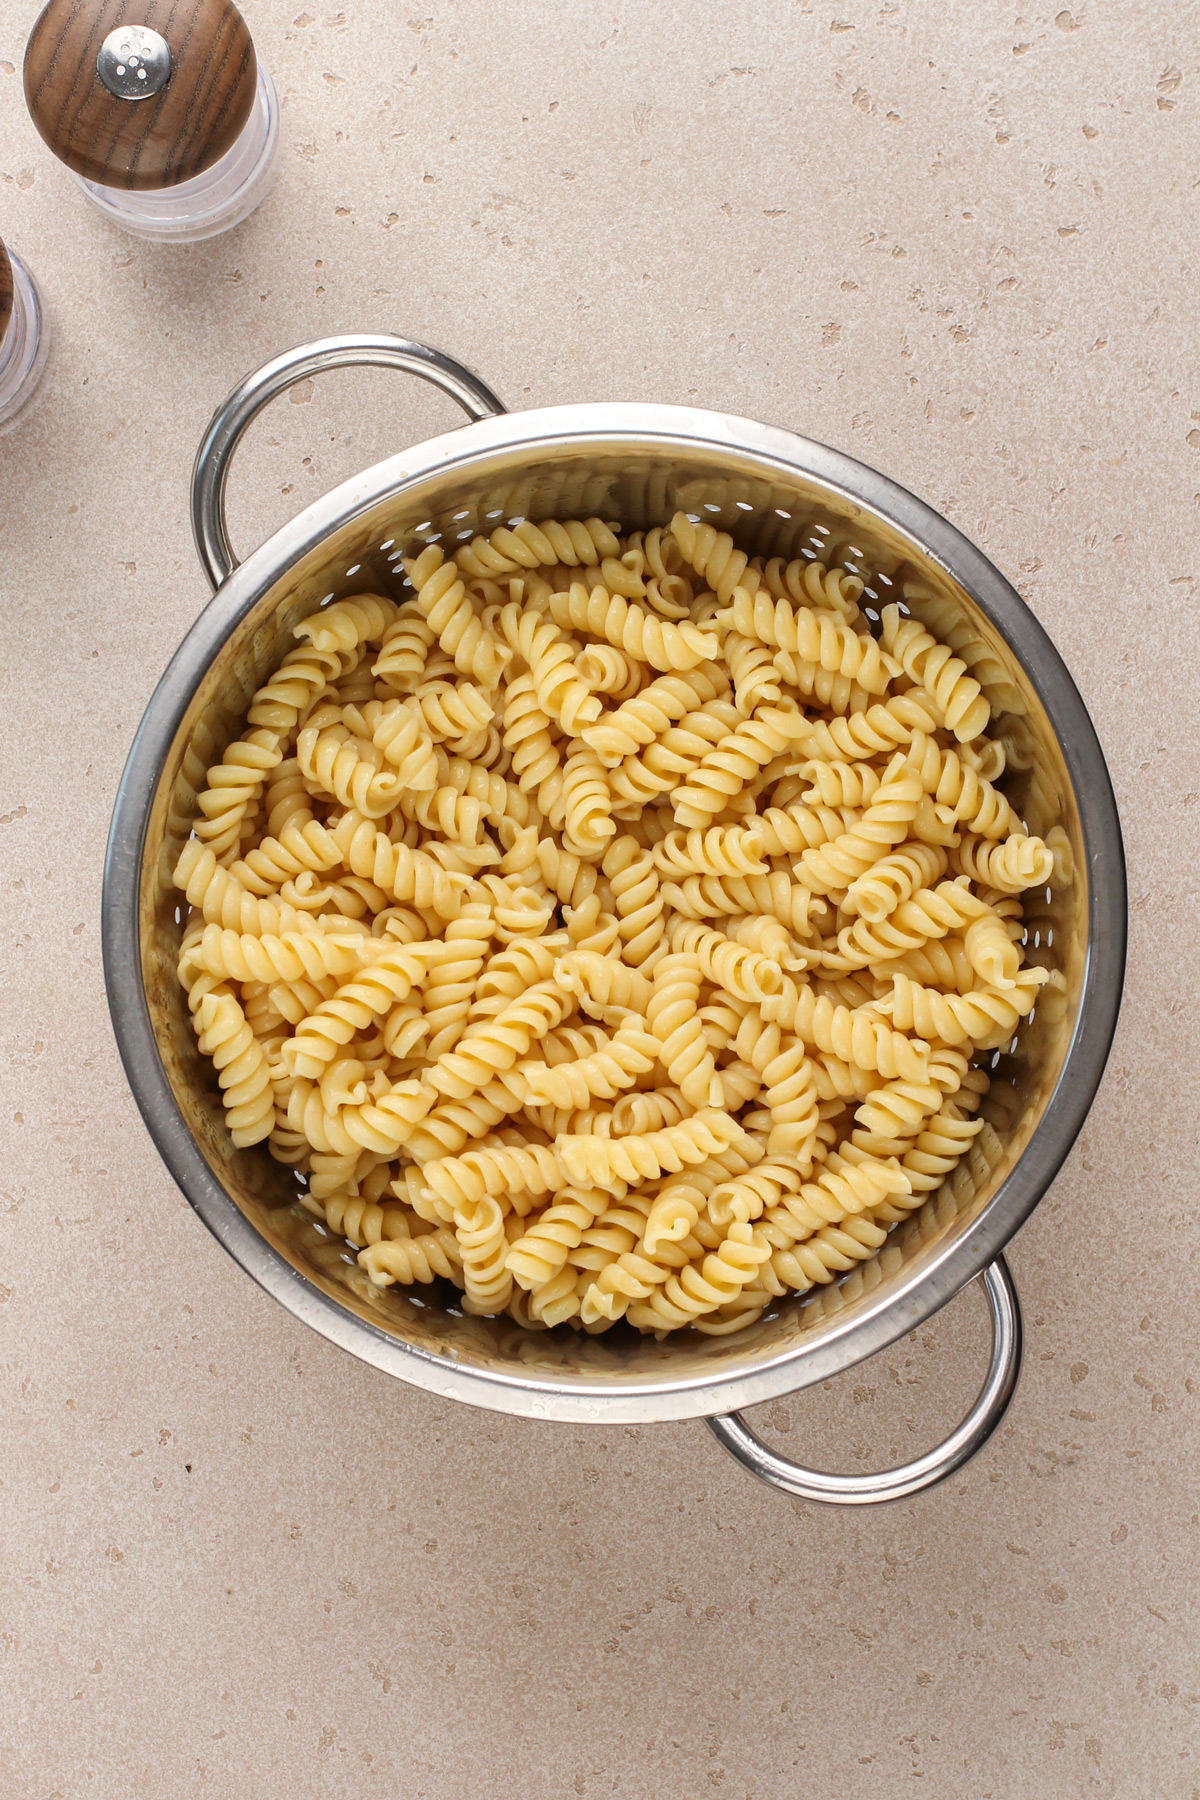 Cooked rotini pasta in a a metal collander.